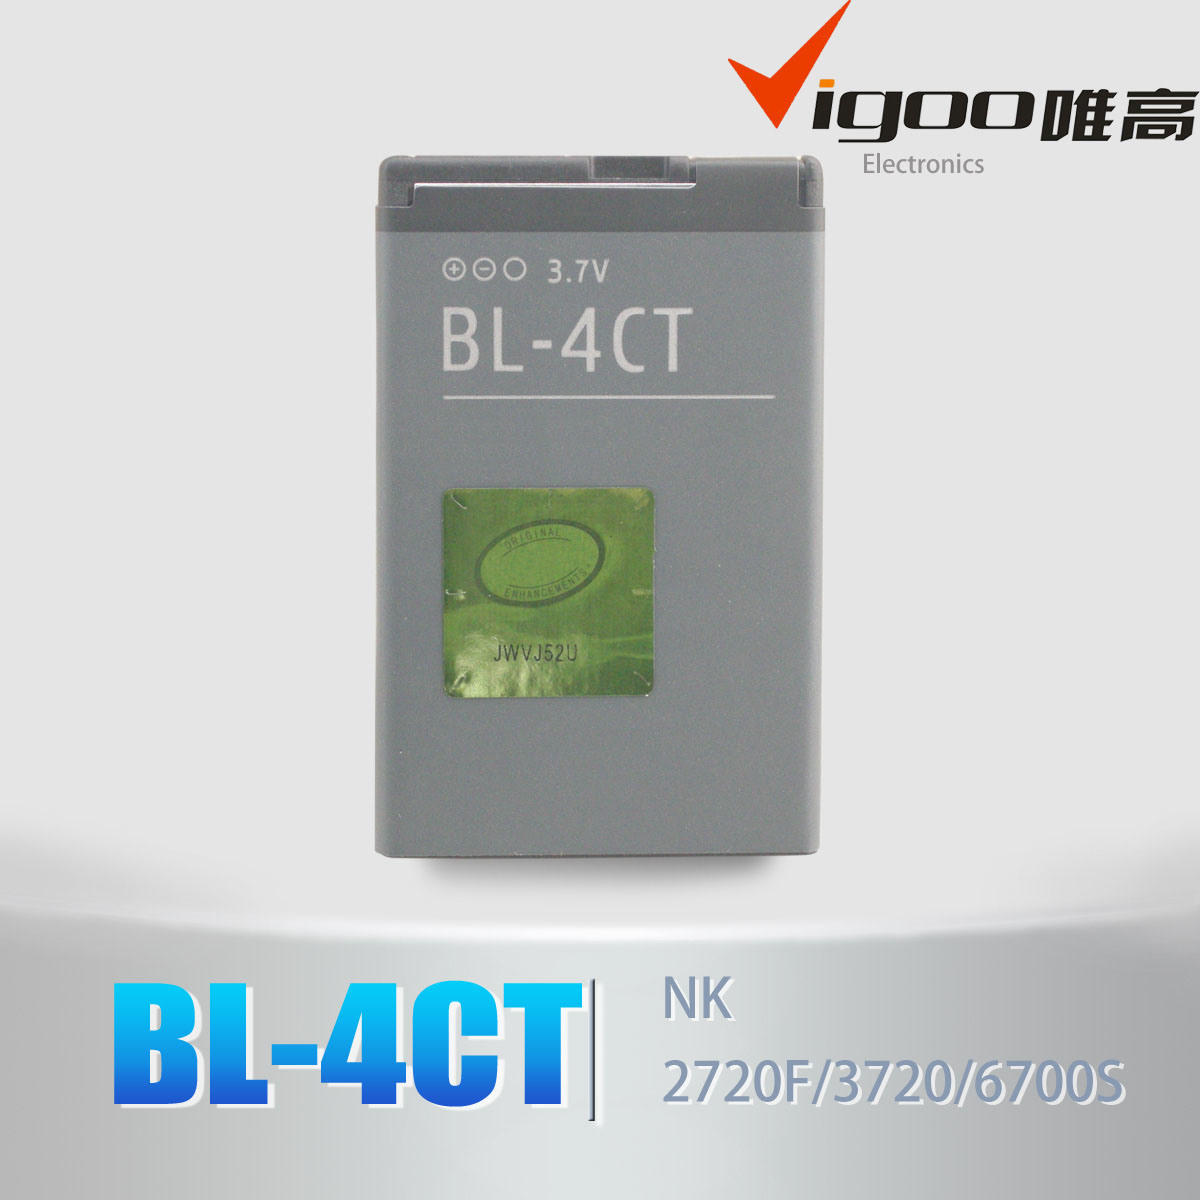 Factory Price High Capacity Wholesale Bl-4CT Battery Manufacturer